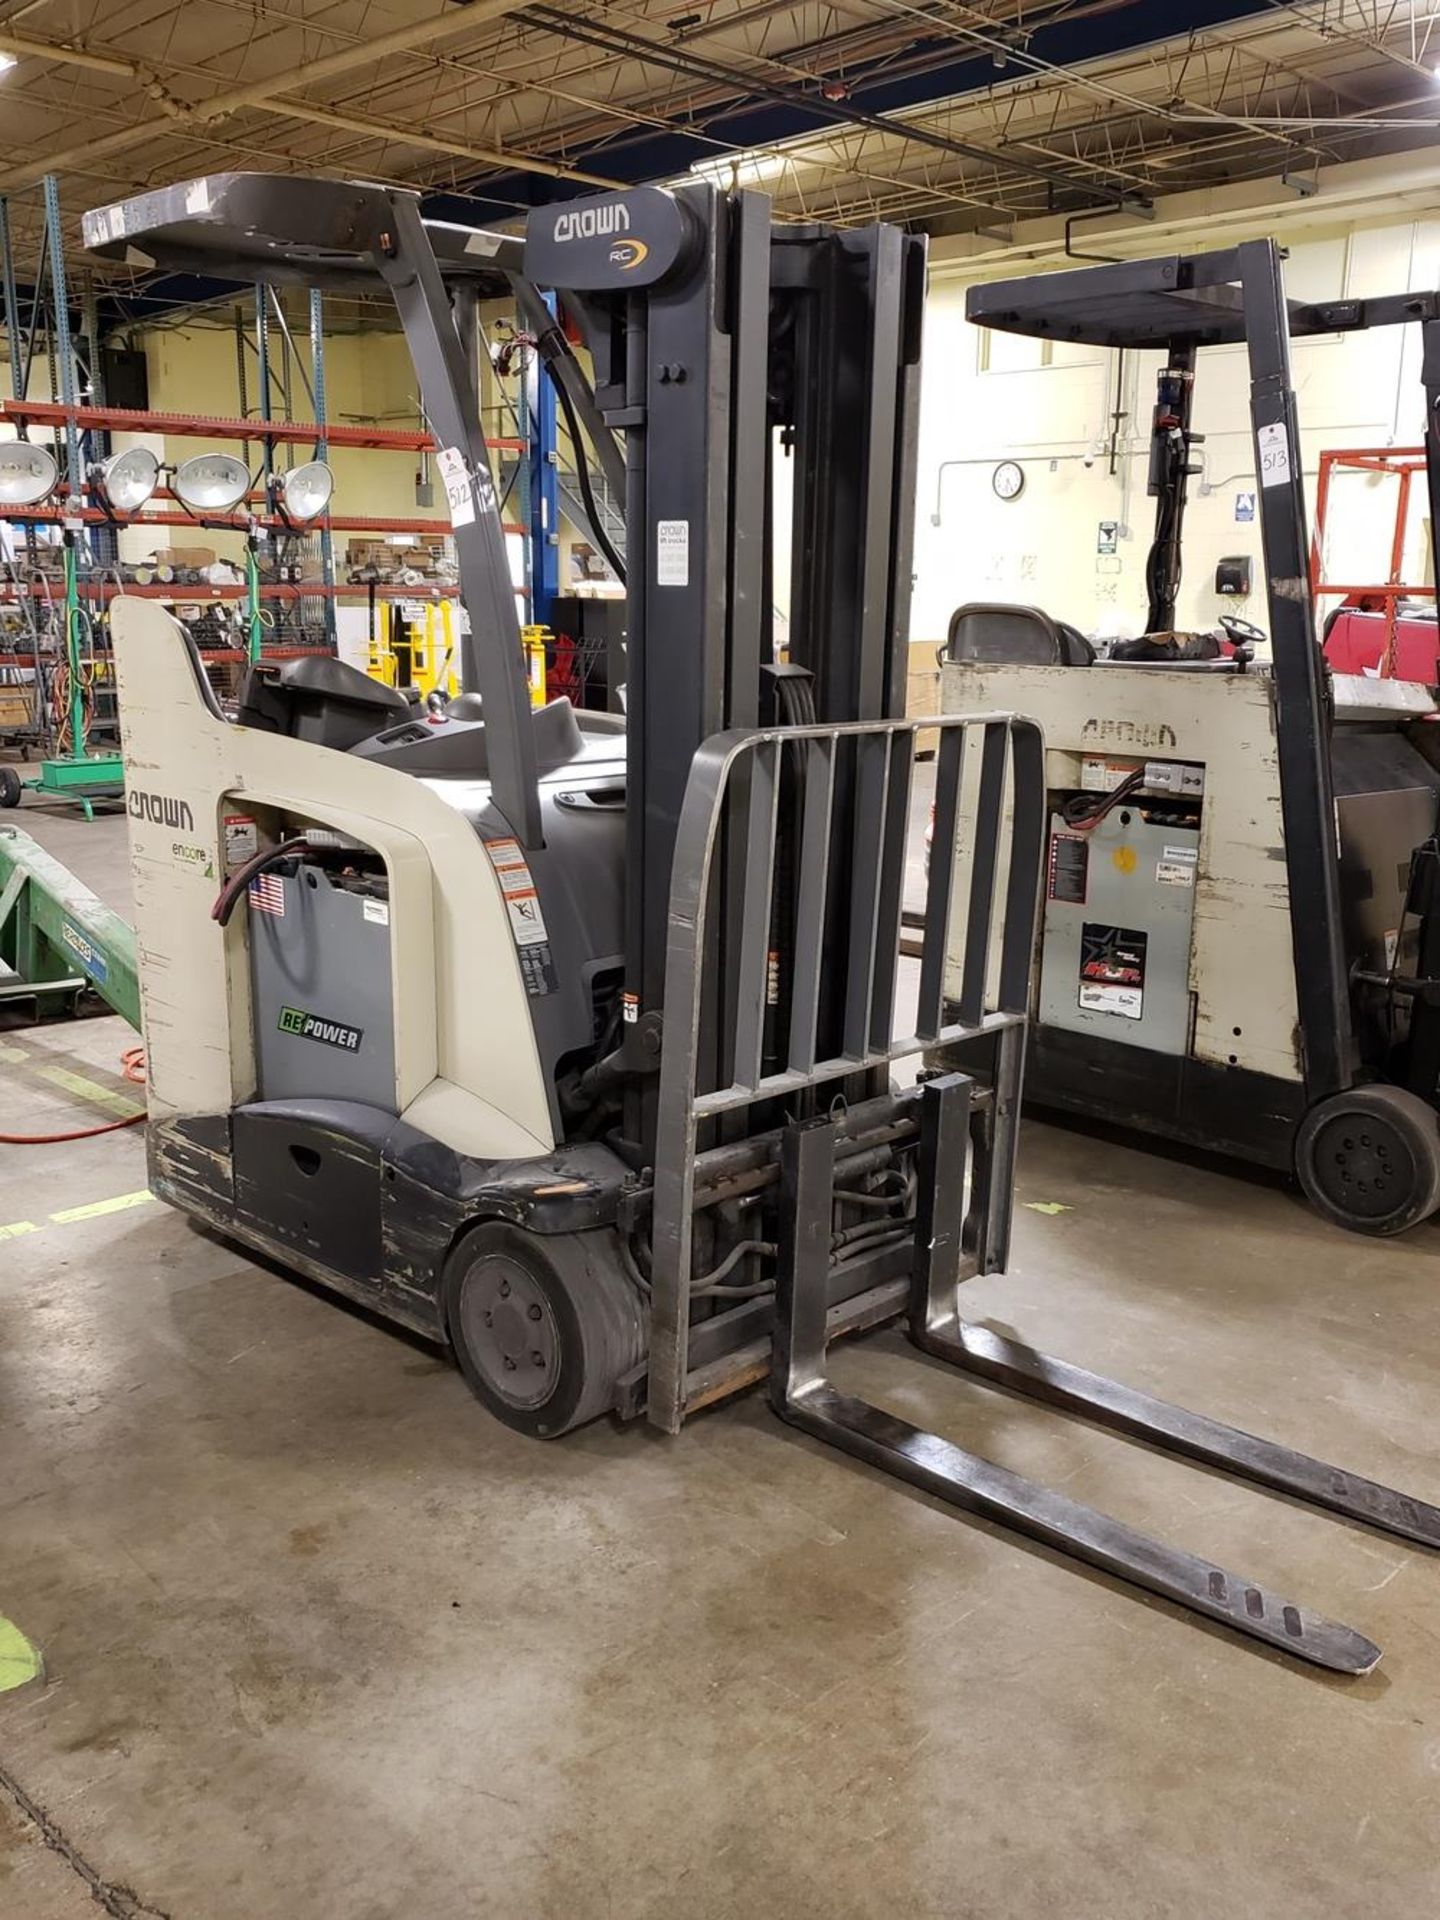 Crown Electric Stand-Up Forklift, 36 Volt, M# RC5540-40TT190, S/N 1A322332 | Rig Fee: $50